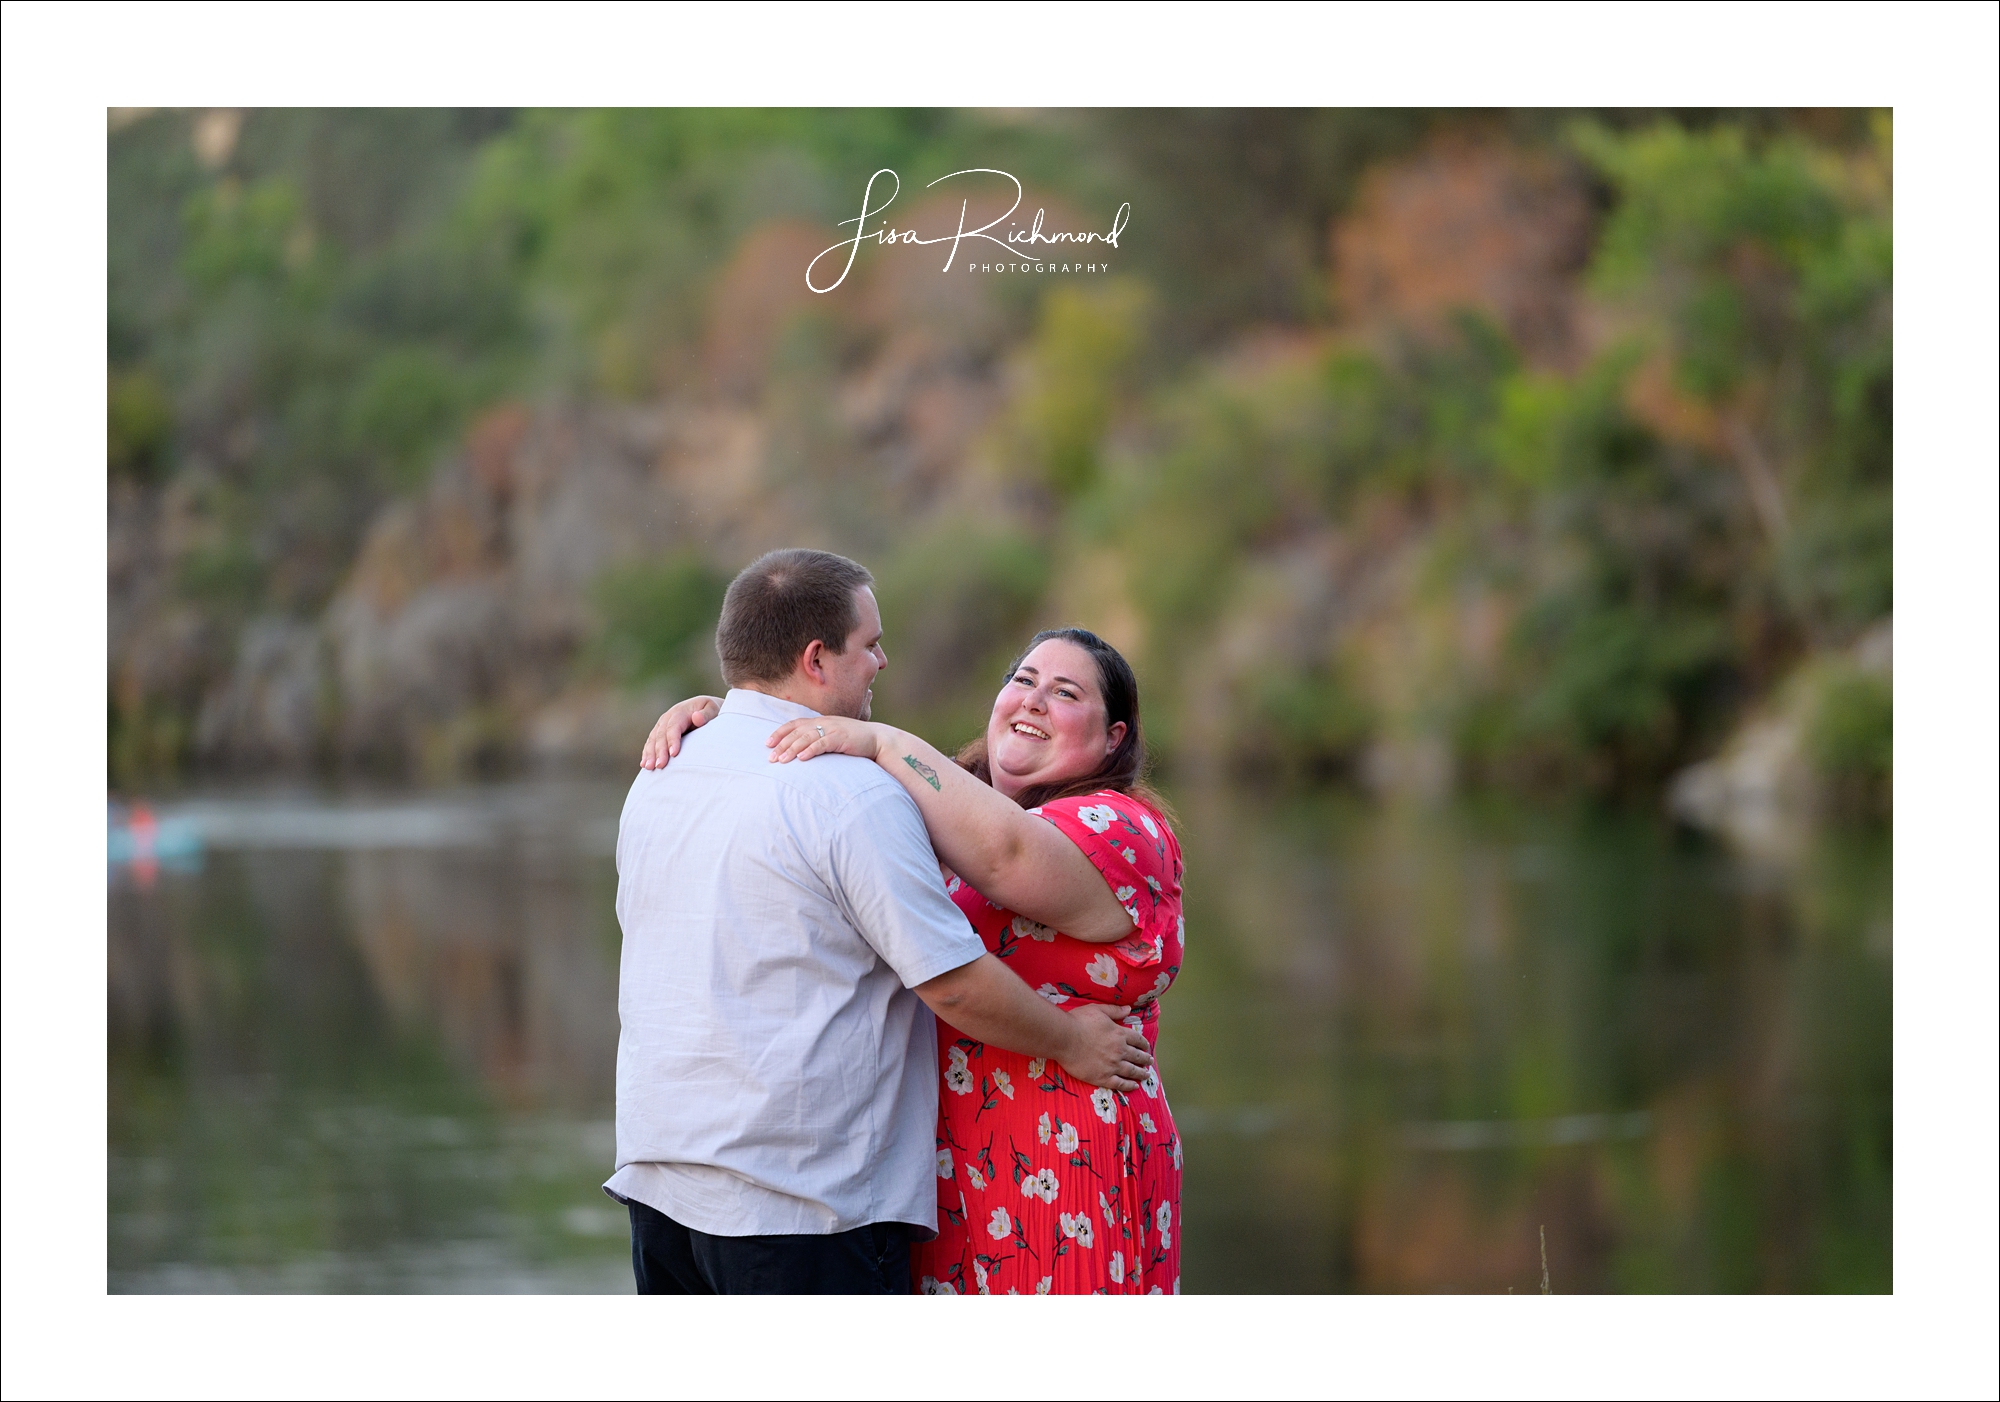 Cara and Justin &#8211; Marrying this September at Lakeside Beach in South Lake Tahoe.